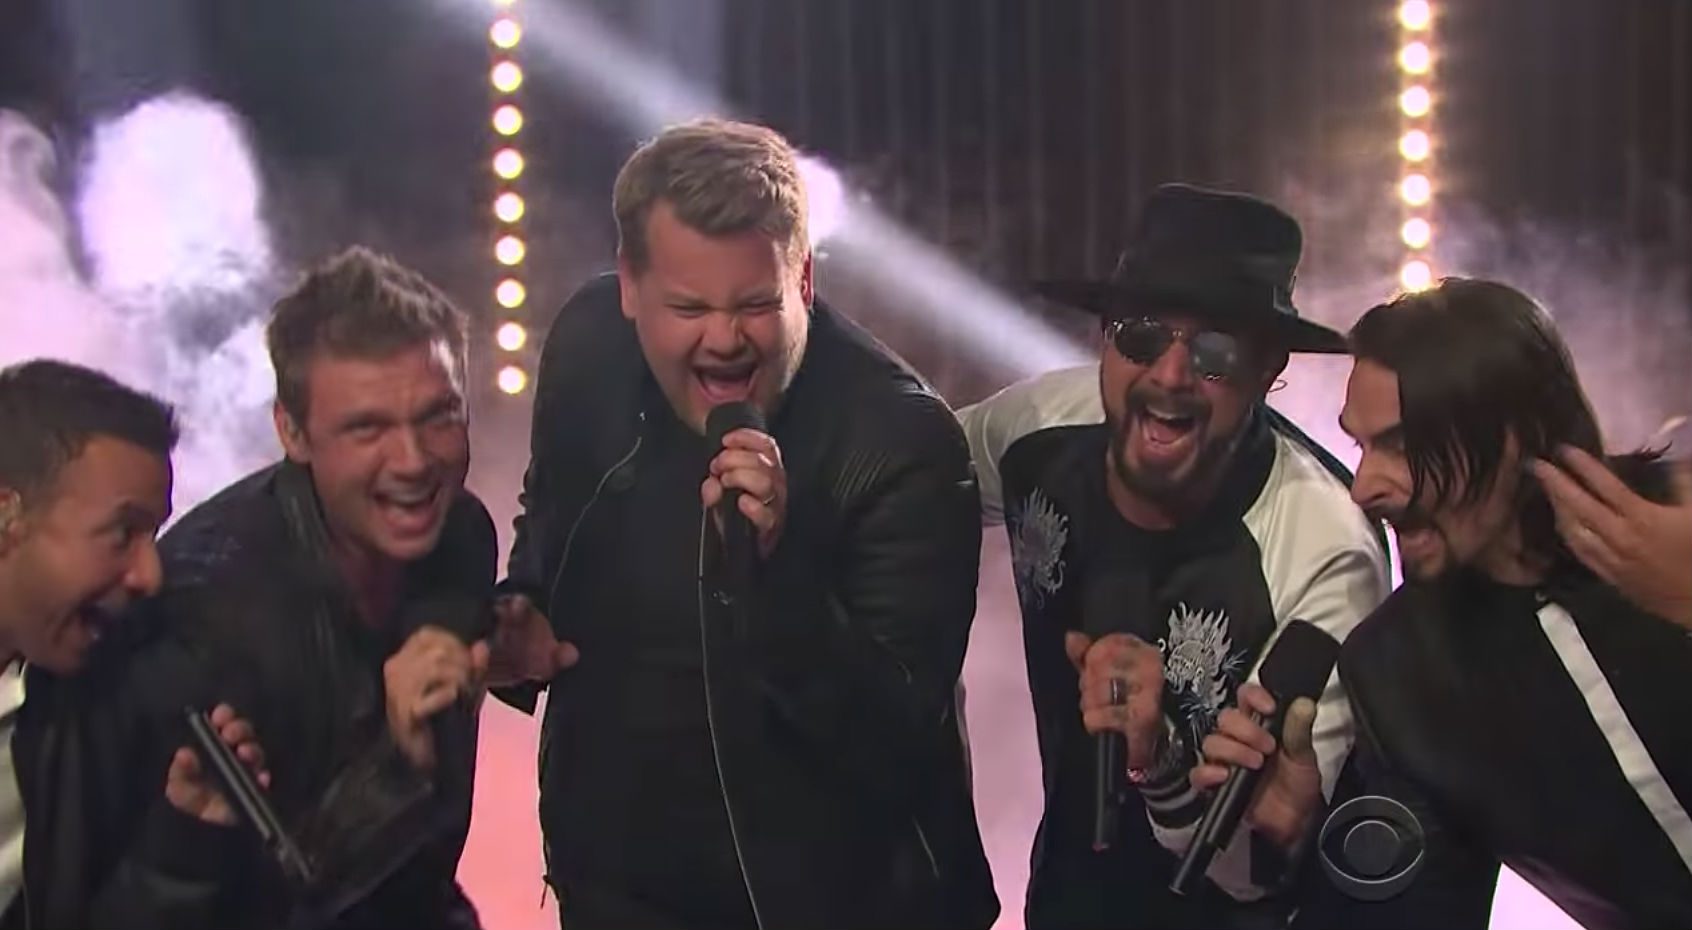 WATCH: James Corden performs ‘Everybody’ with the Backstreet Boys